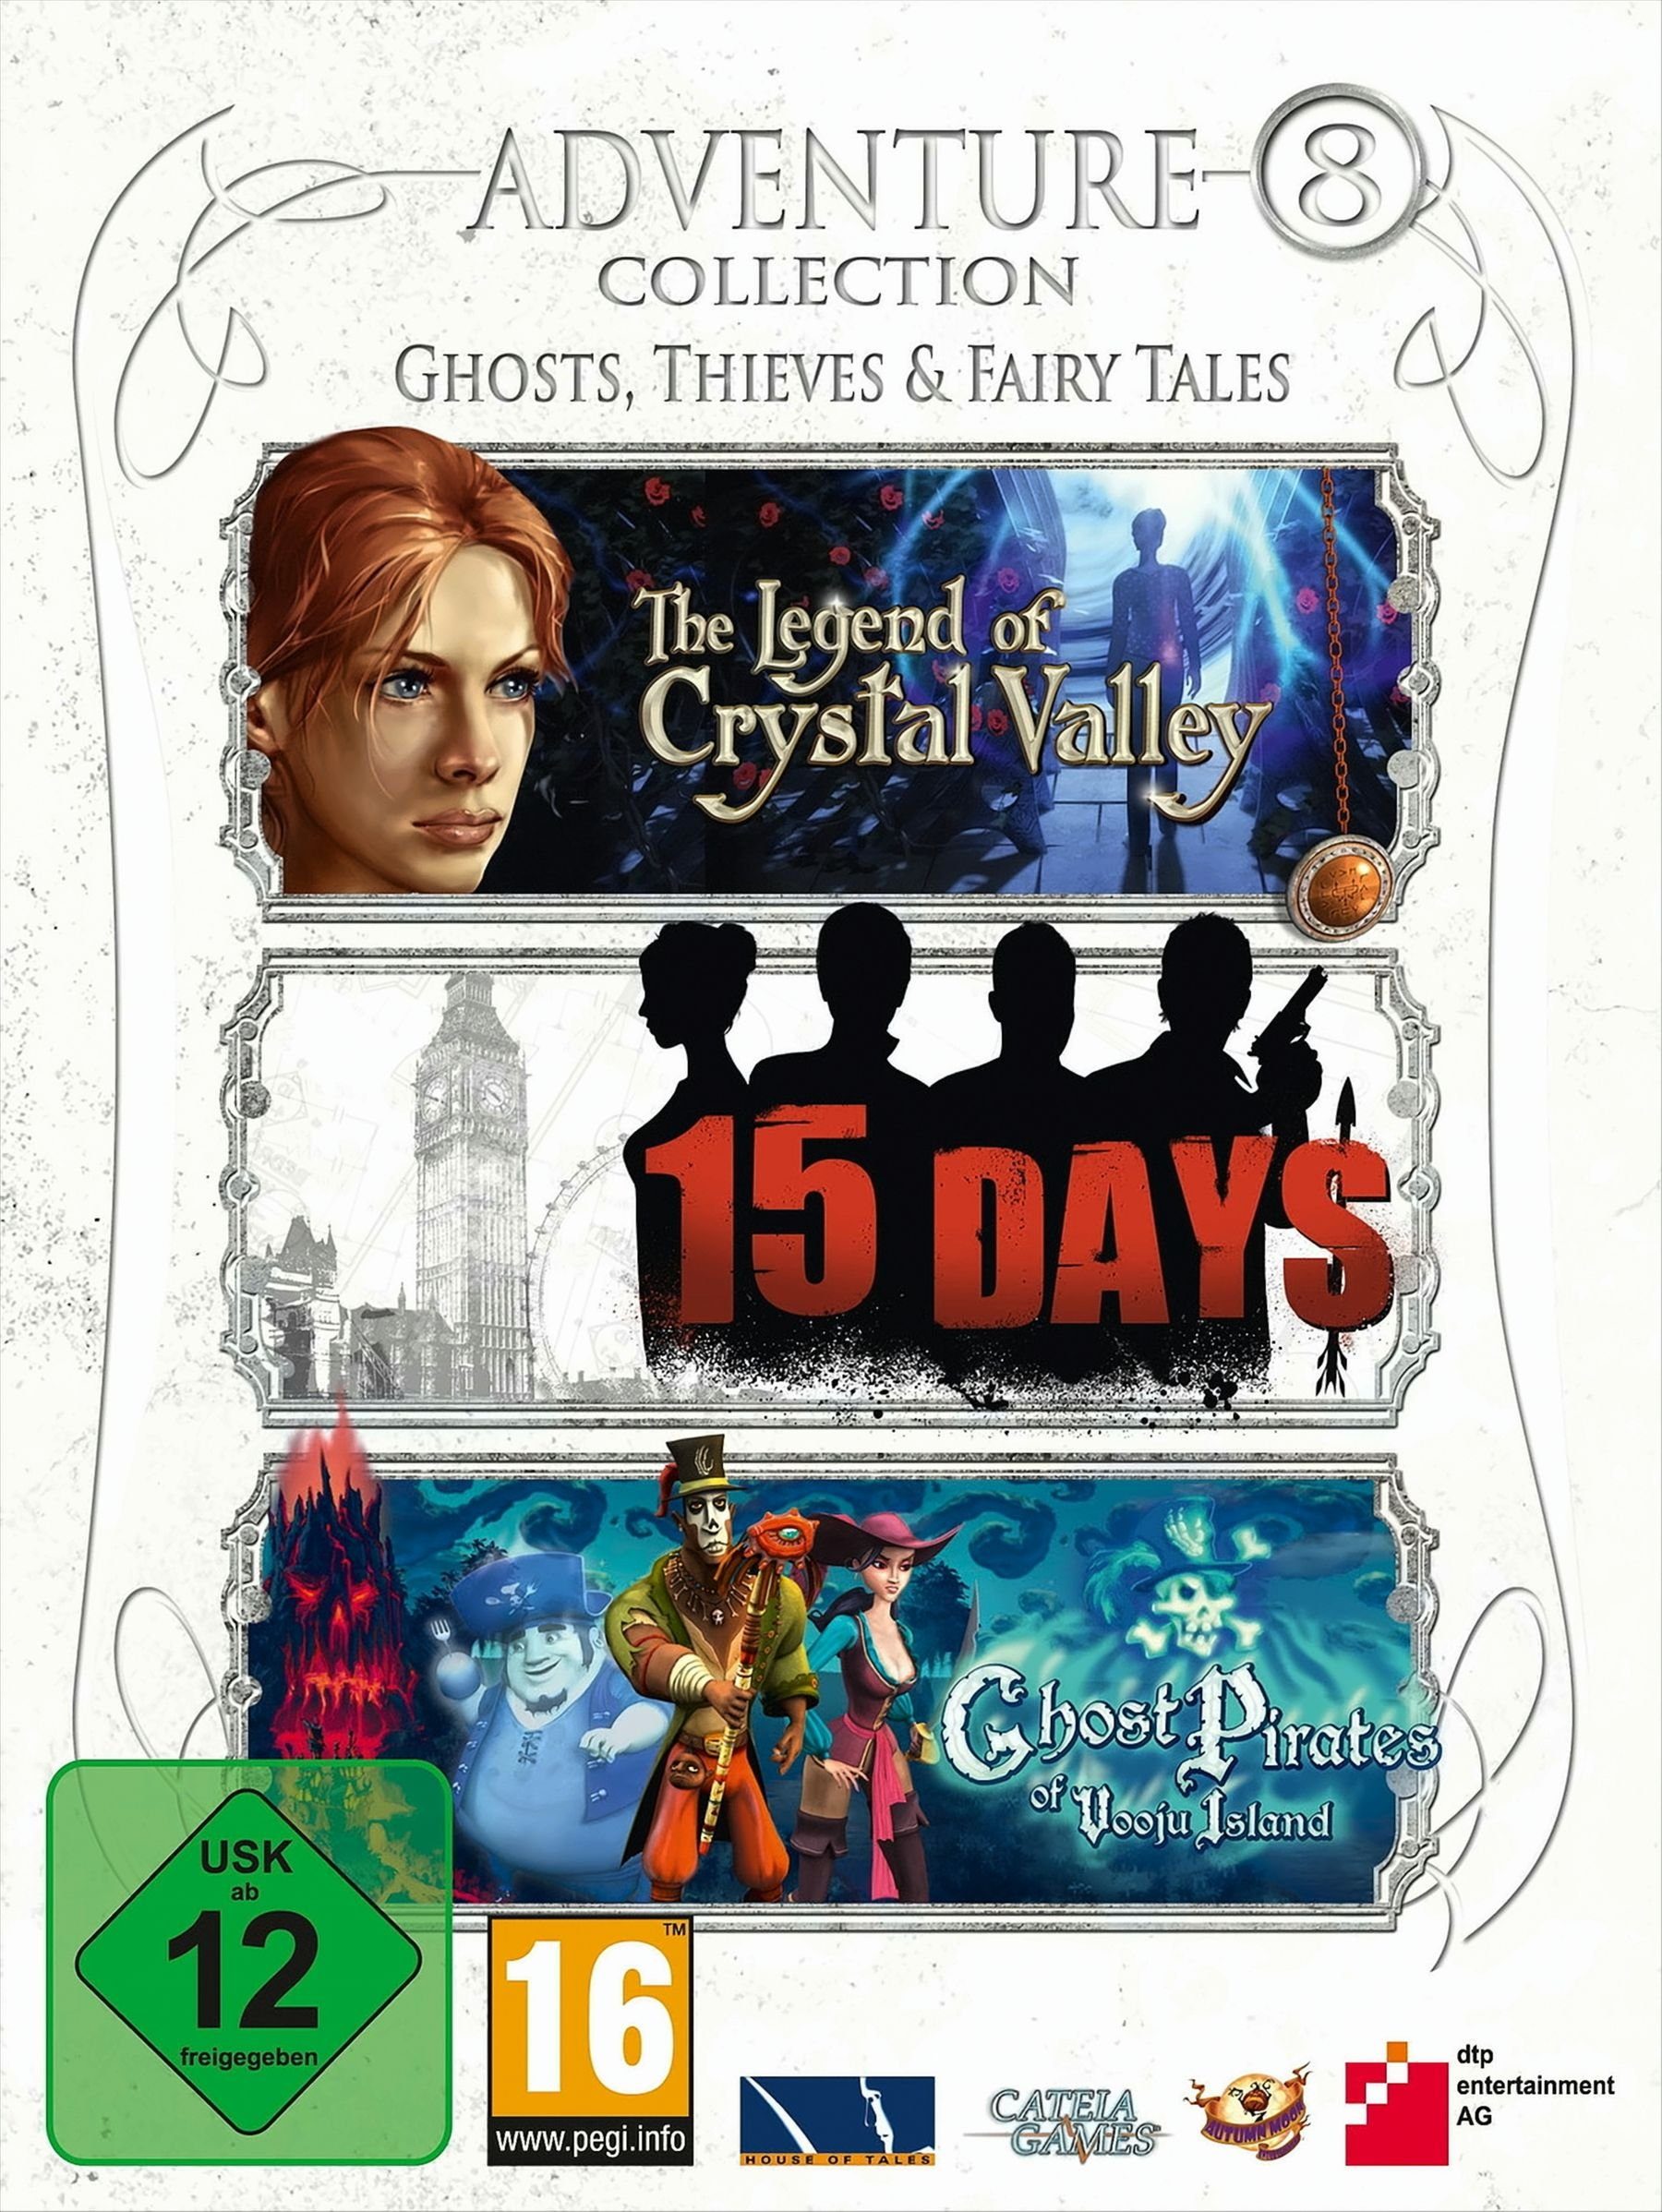 Adventure Collection 8 - Ghosts, Thieves & Fairy Tales PC